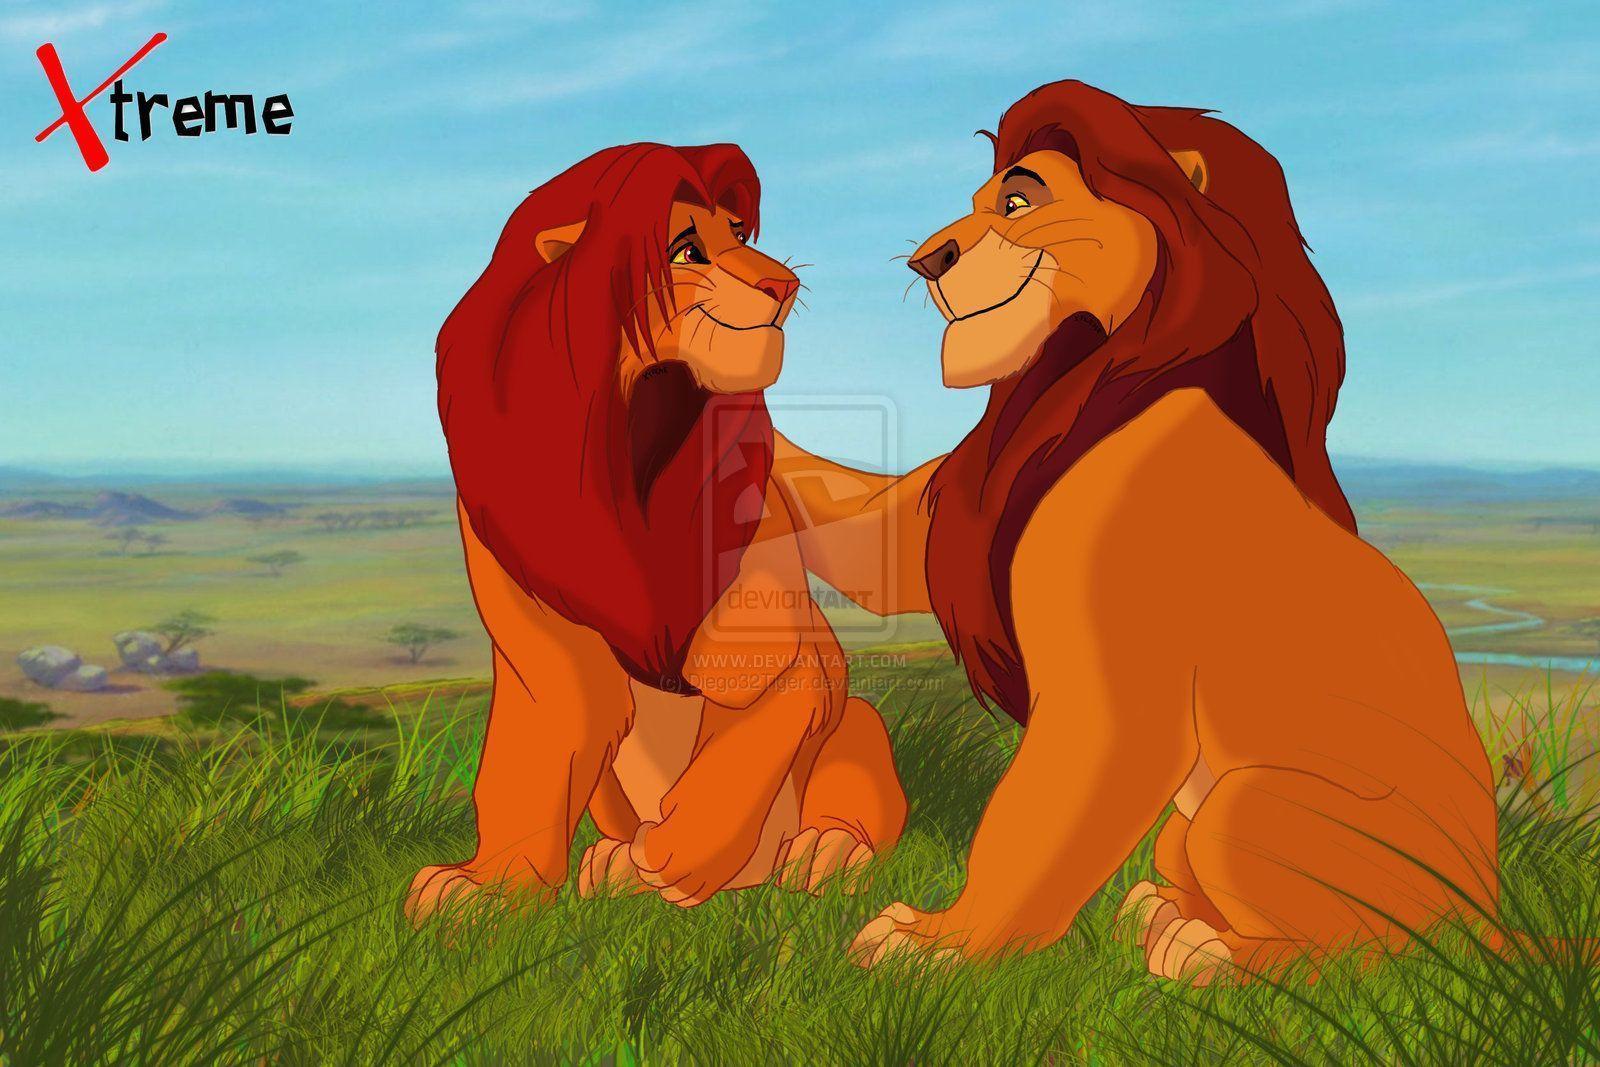 The Lion King Mufasa and Simba For iPhone. Cartoons